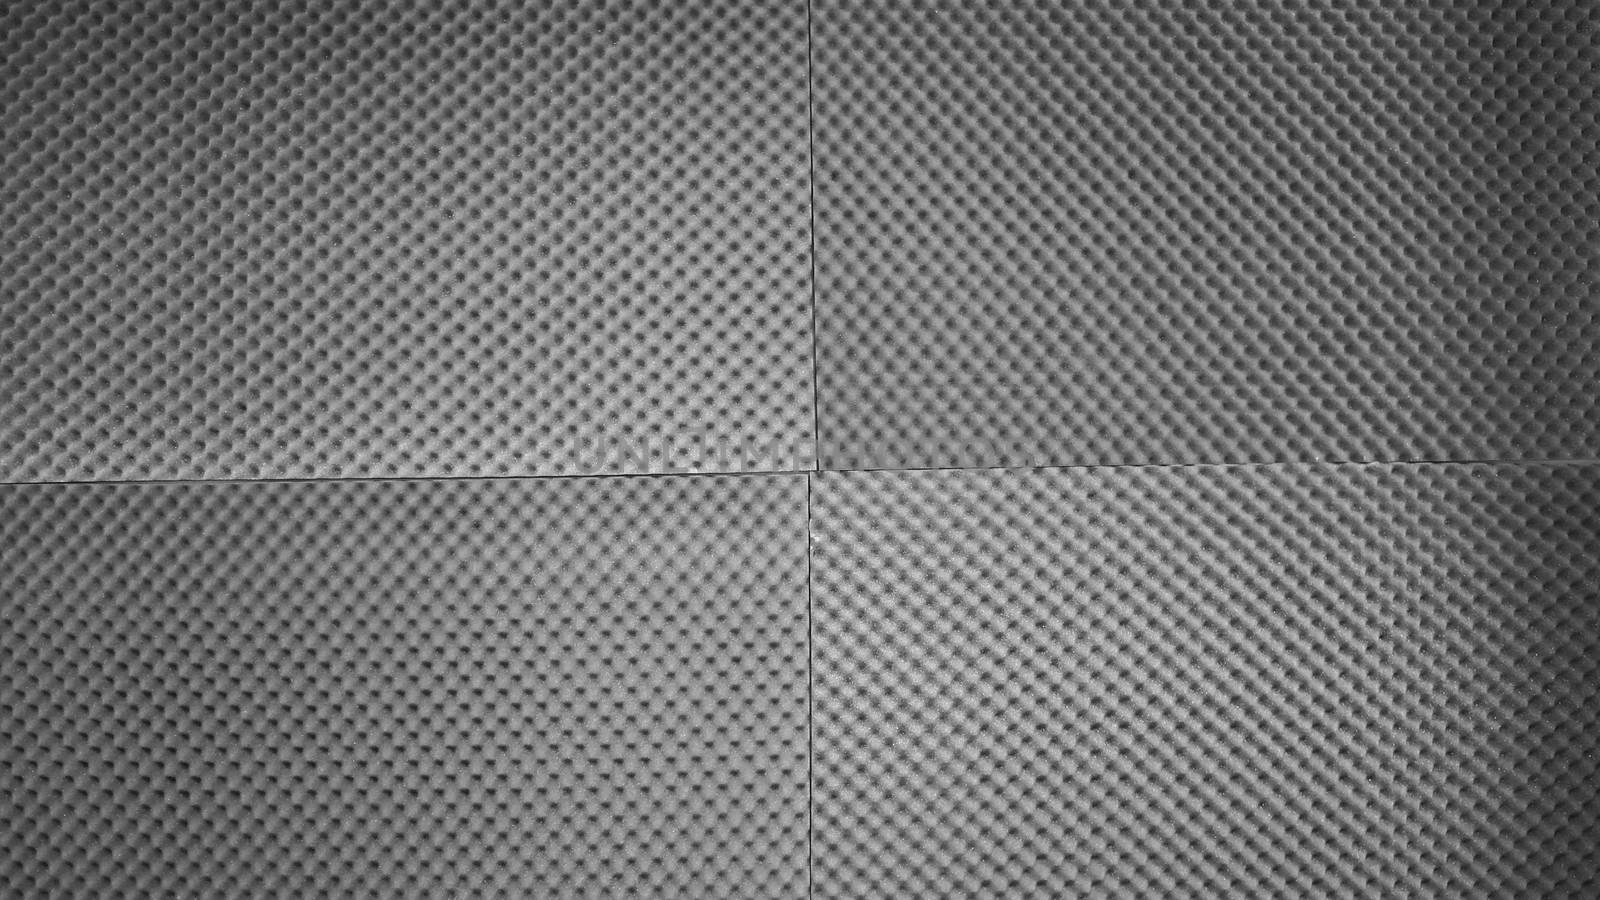 Sound proof padding acoustic soft foam grey color double thick panels layers on the recording studio wall for reduce or absorb or protect this room from other falsetto outside for professional works.